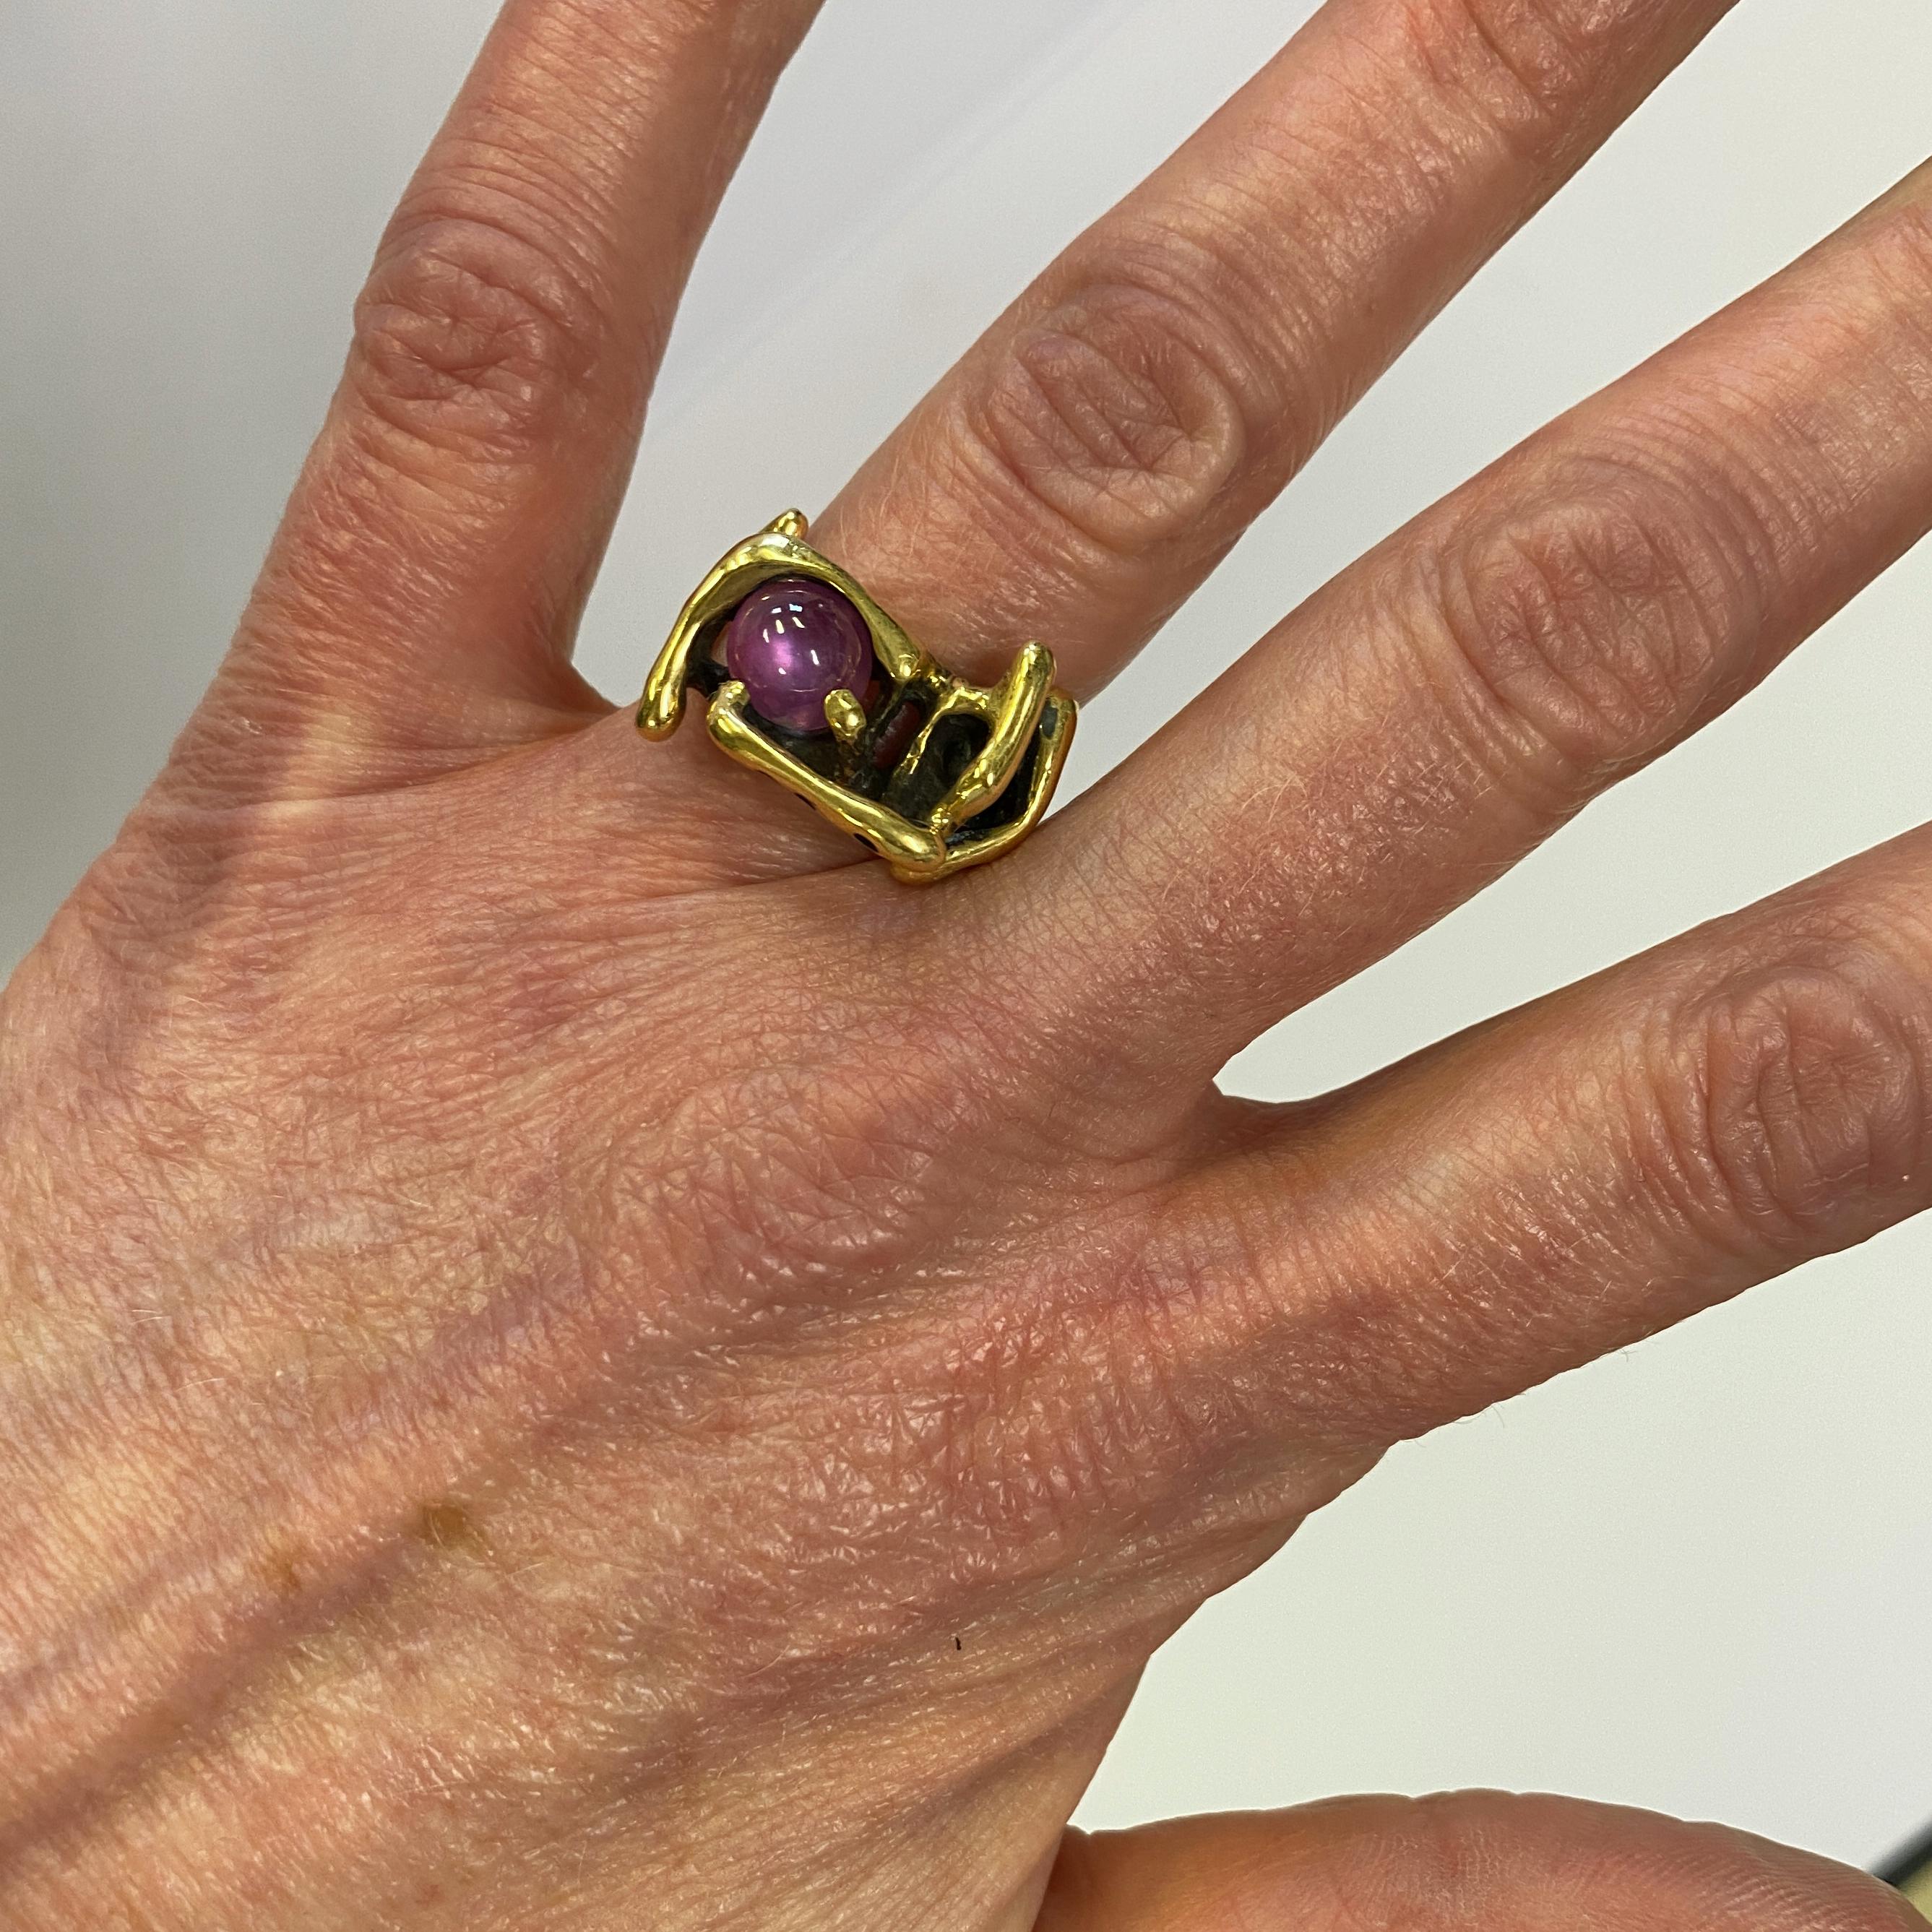 We think whoever made this unsigned studio ring was probably inspired by the work of Bob Winston, the eccentric mid-century Northern California modern jeweler and sculptor.  It features a high-dome natural ruby cabochon (approximately 3.5 carats)